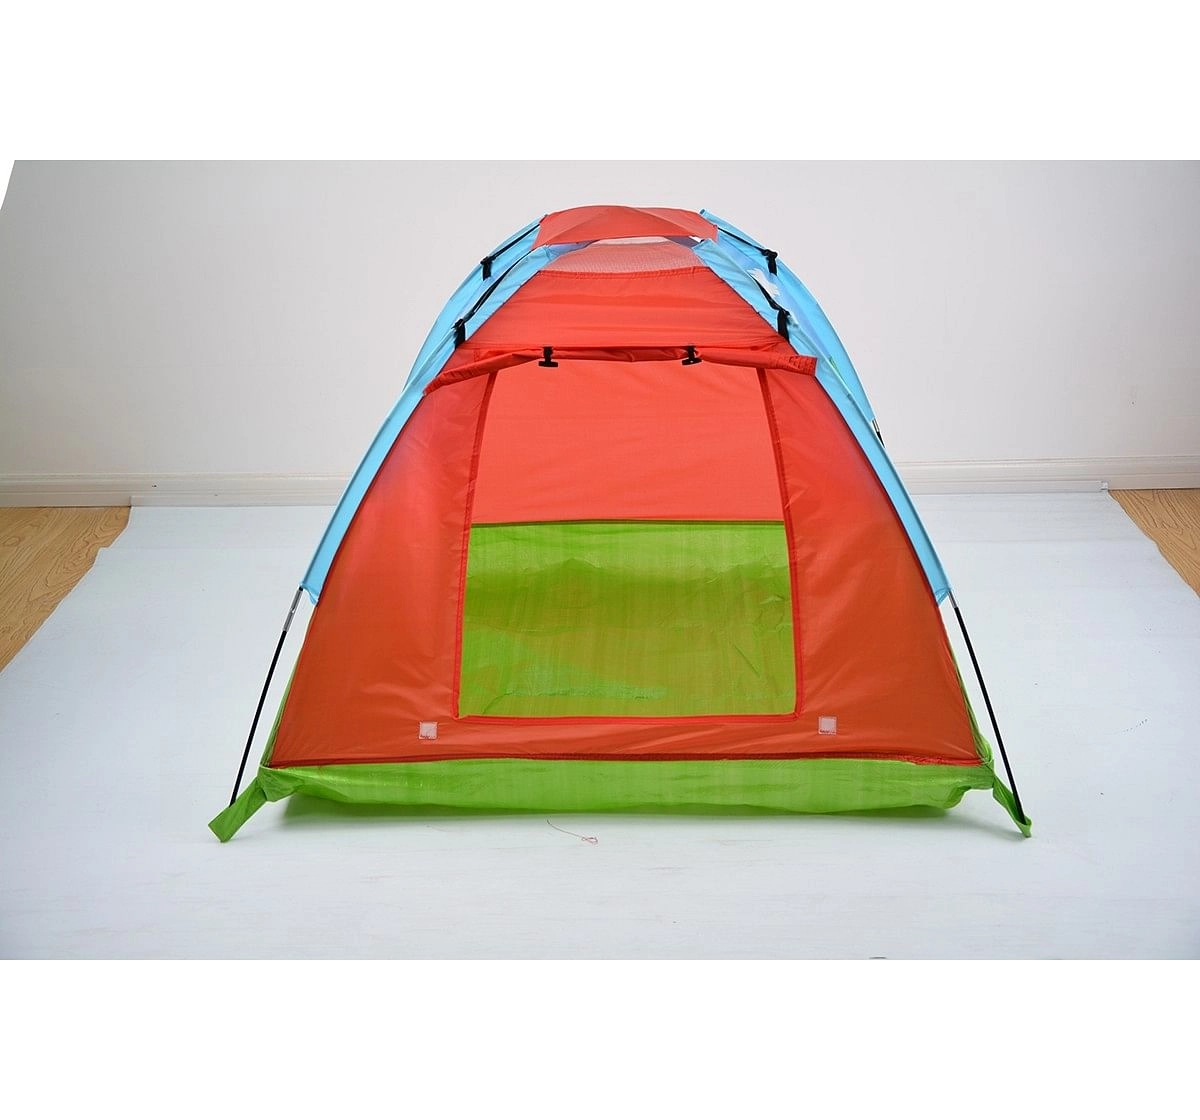 Flourish Peppa Pig Camping Tent Outdoor Leisure for Kids age 3Y+ 